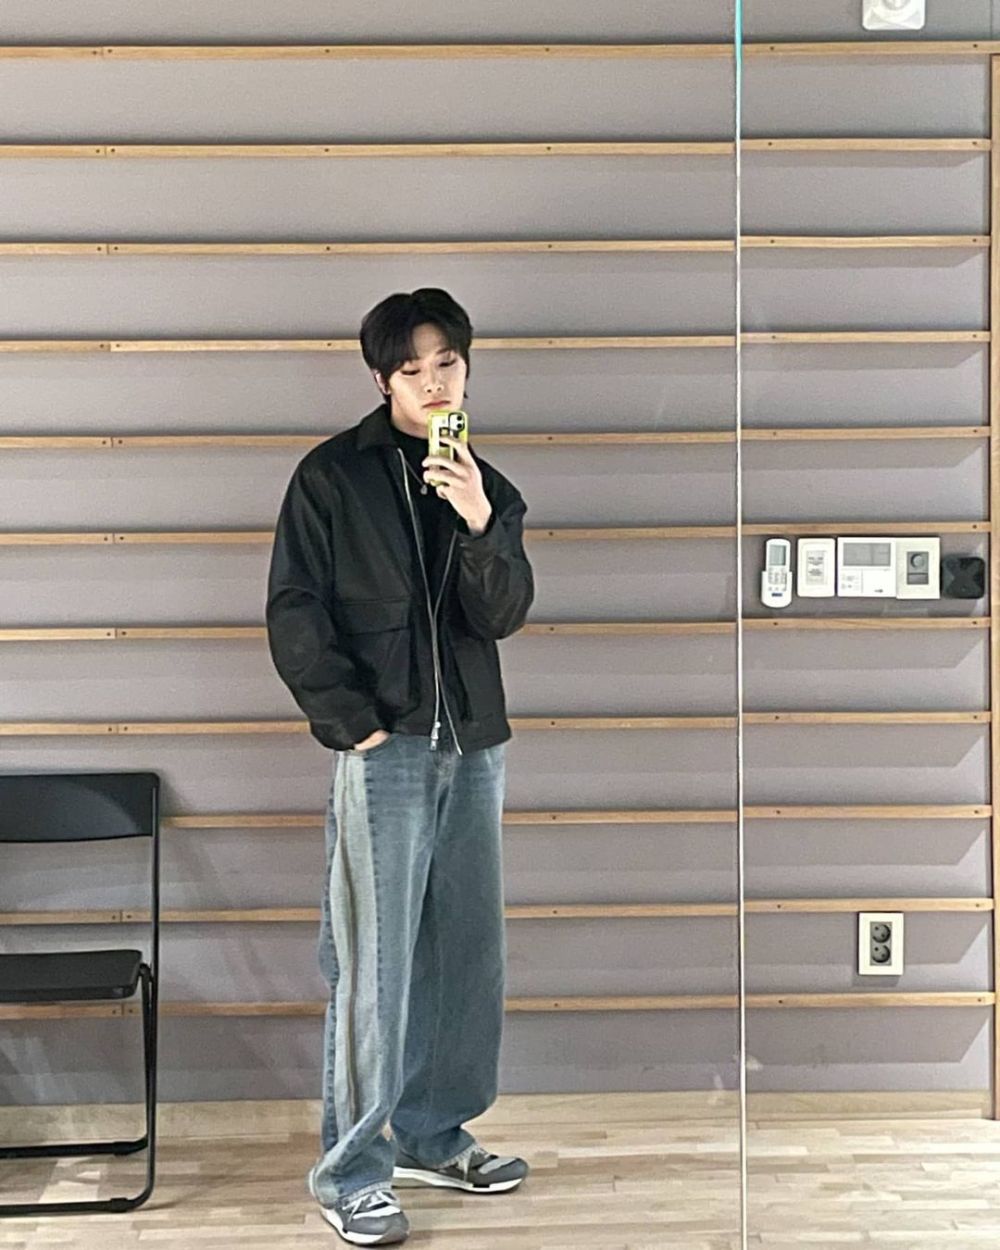 9 Ide Outfit Loose Pants Jeans ala I.N Stray Kids, Simple dan Stylish!